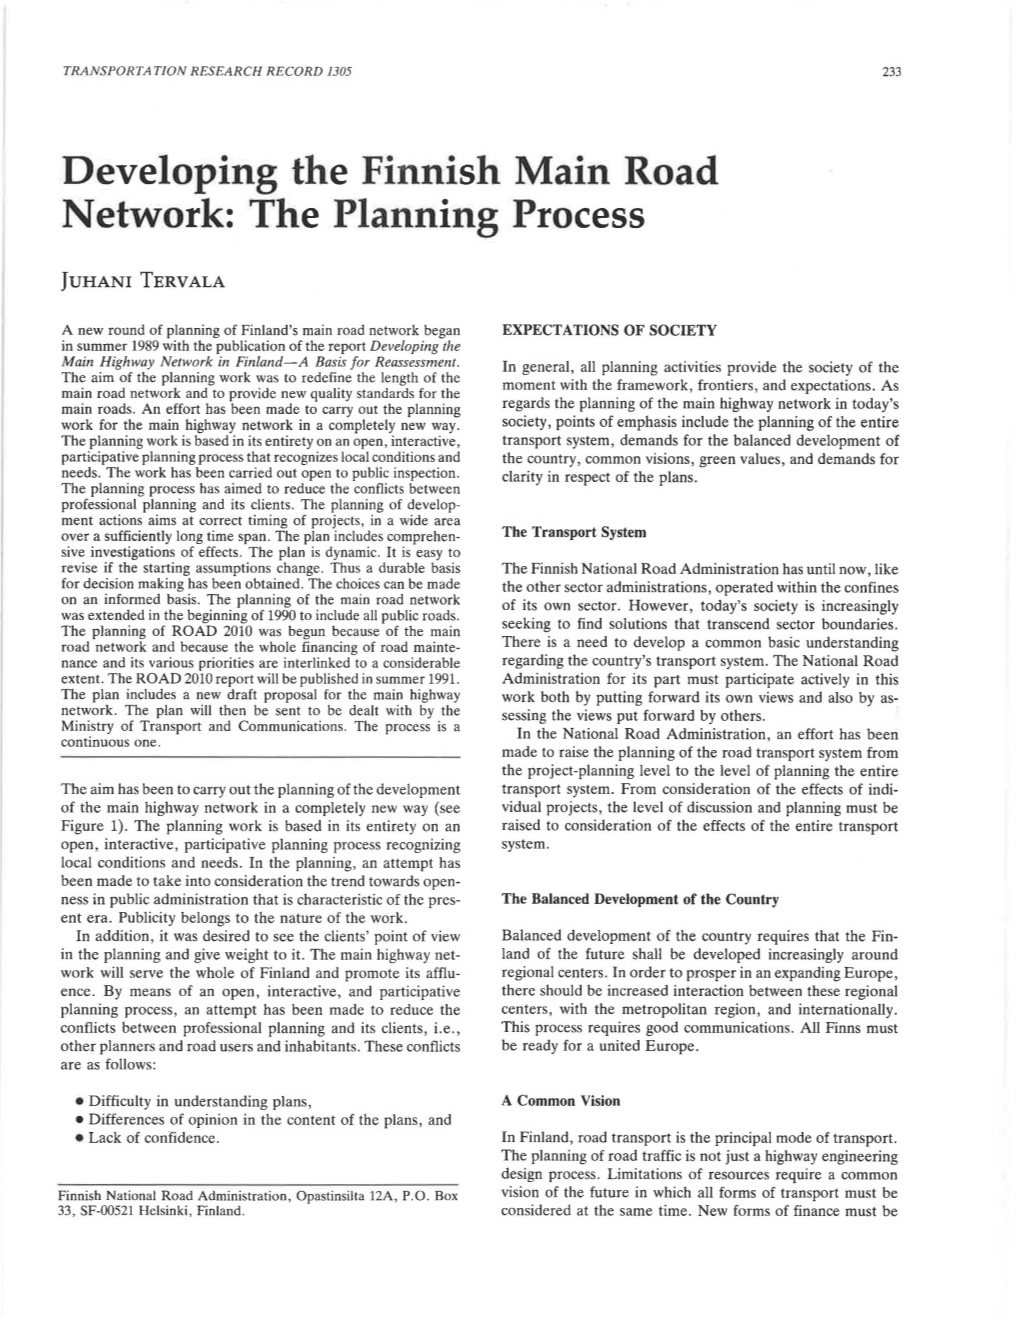 Developing the Finnish Main Road Network: the Planning Process